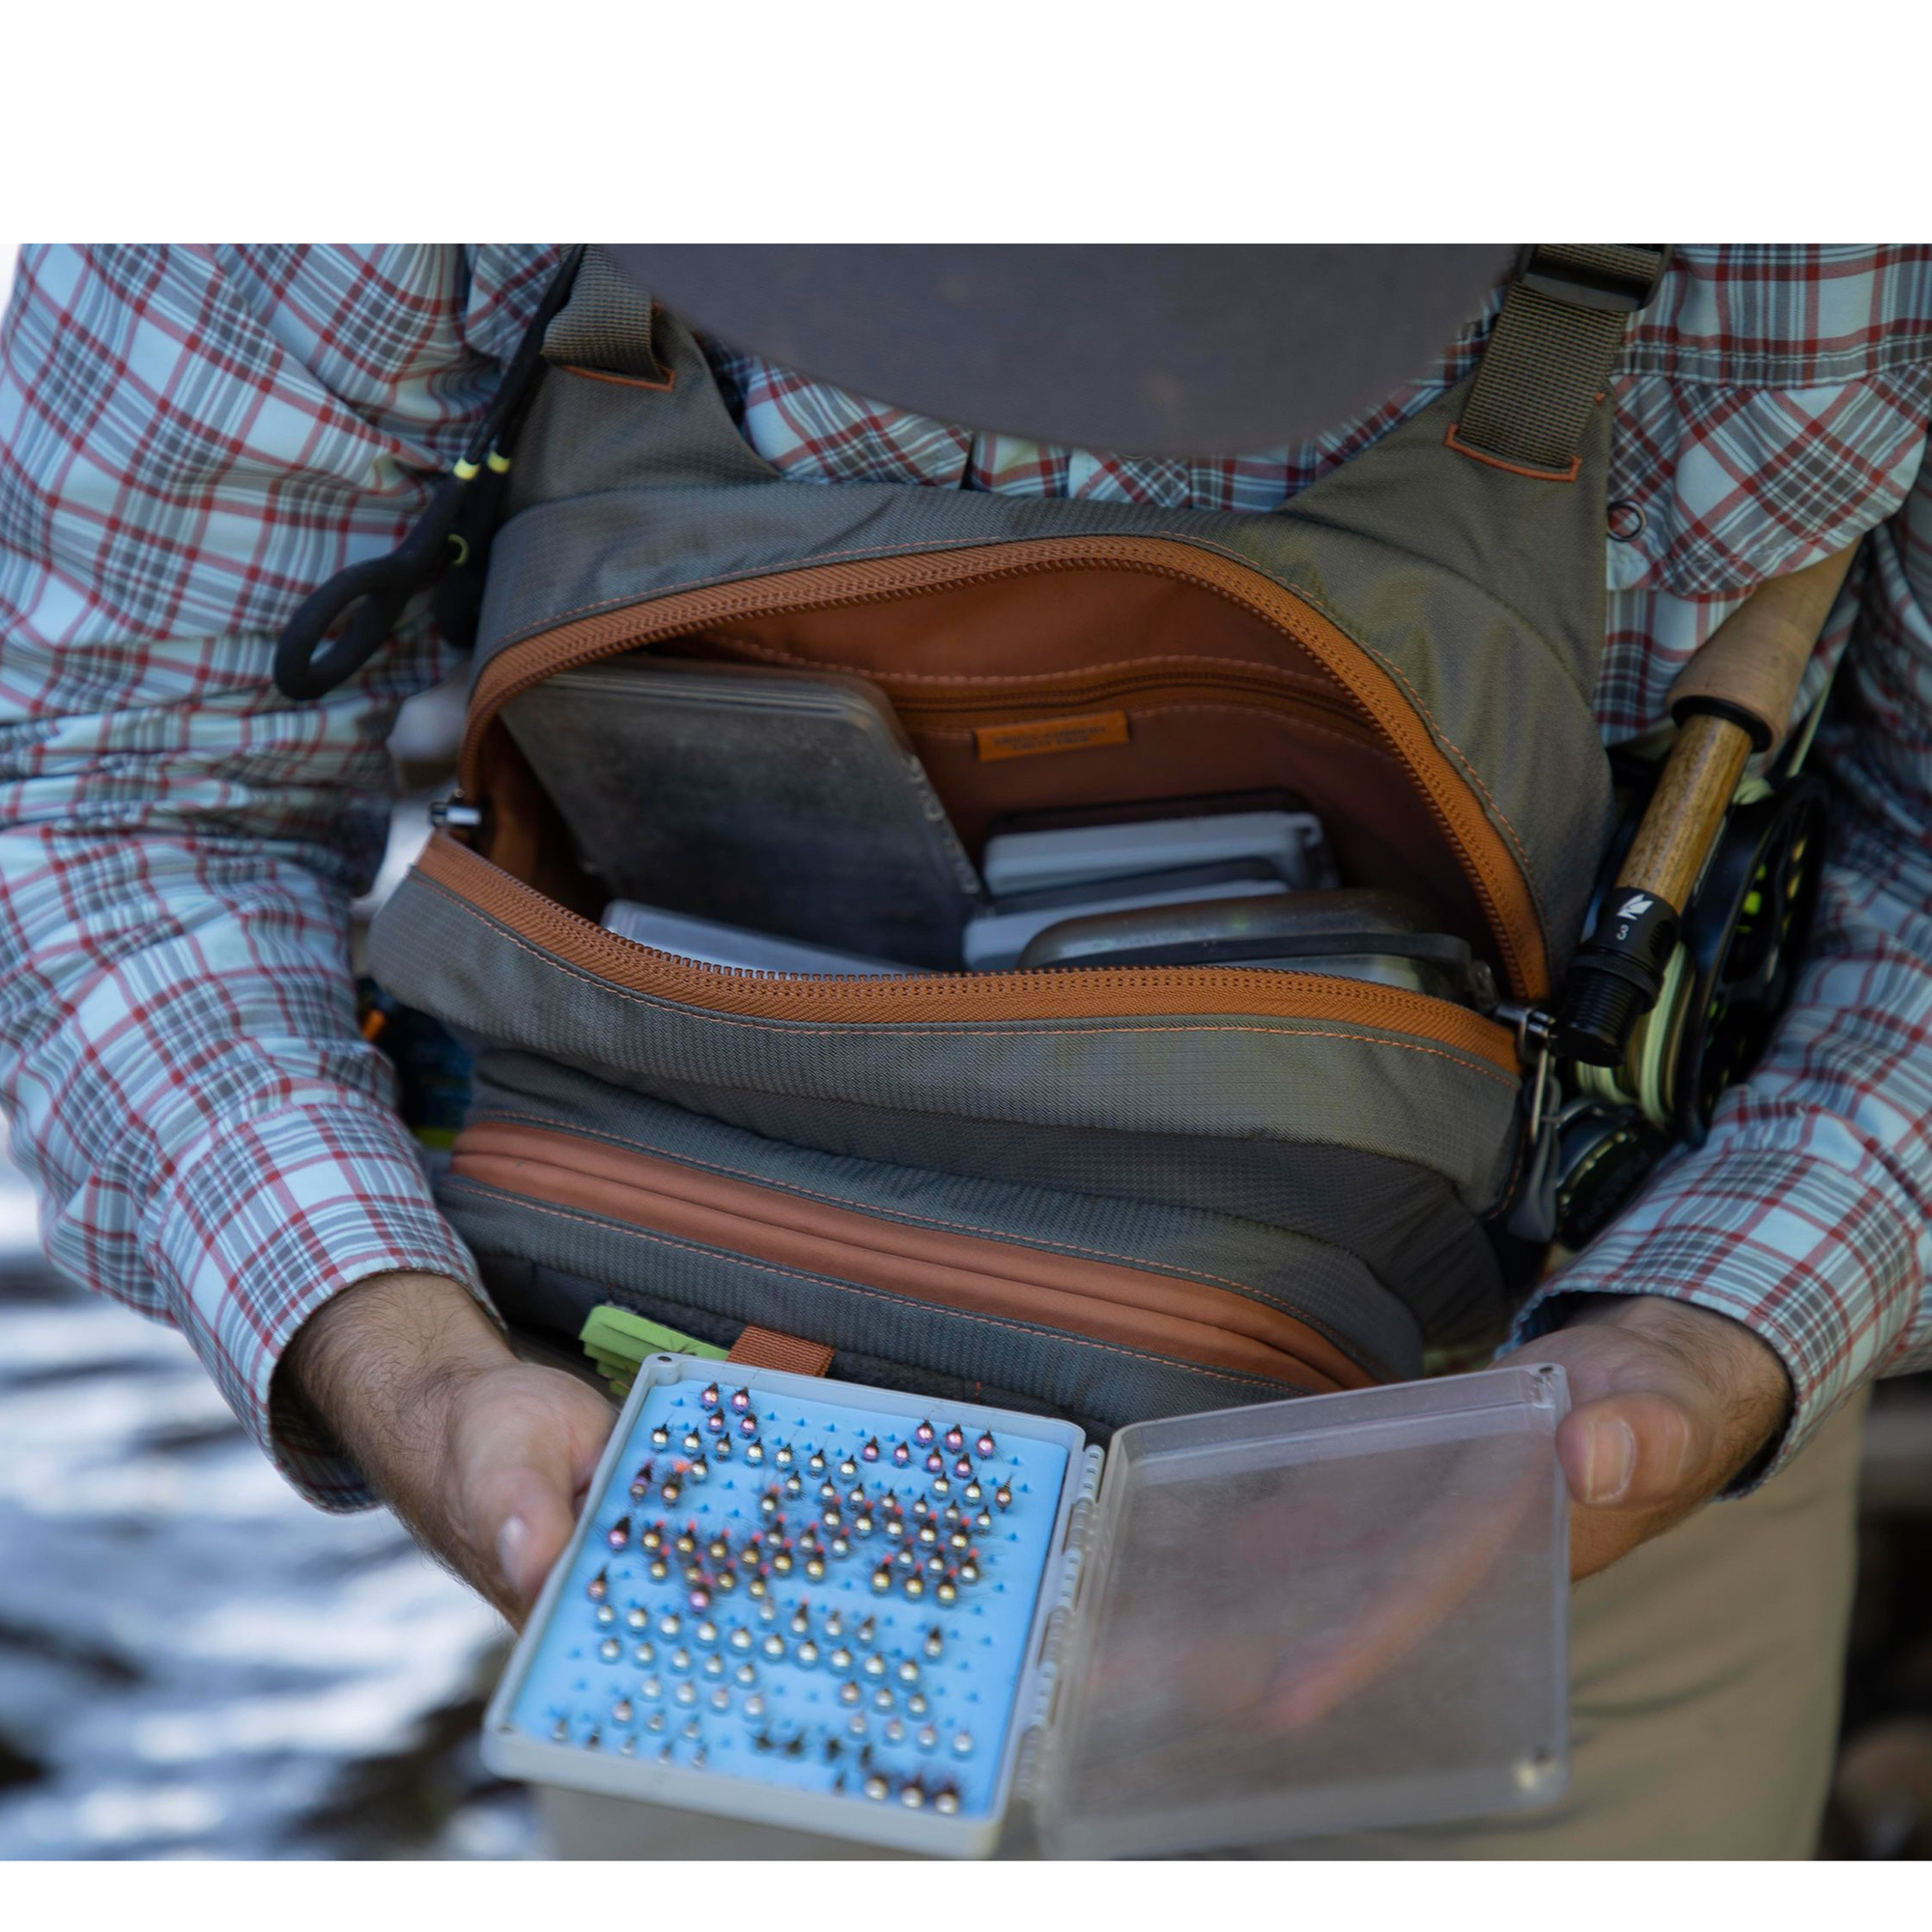 fishpond Cross-Current Fly Fishing Chest Pack, Tackle Storage